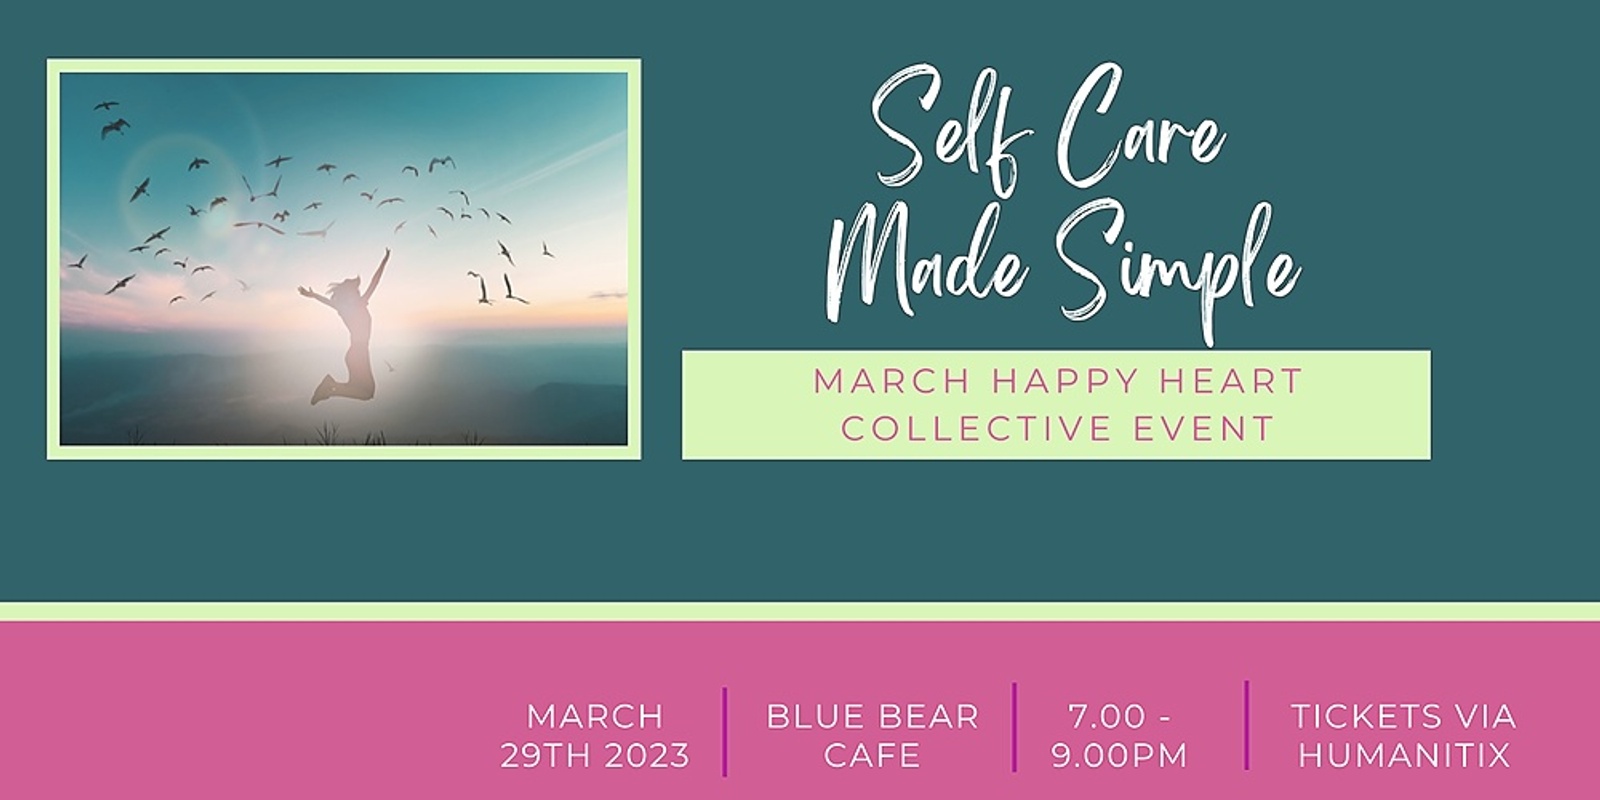 Self-Care Made Simple - March Happy Heart Collective Event